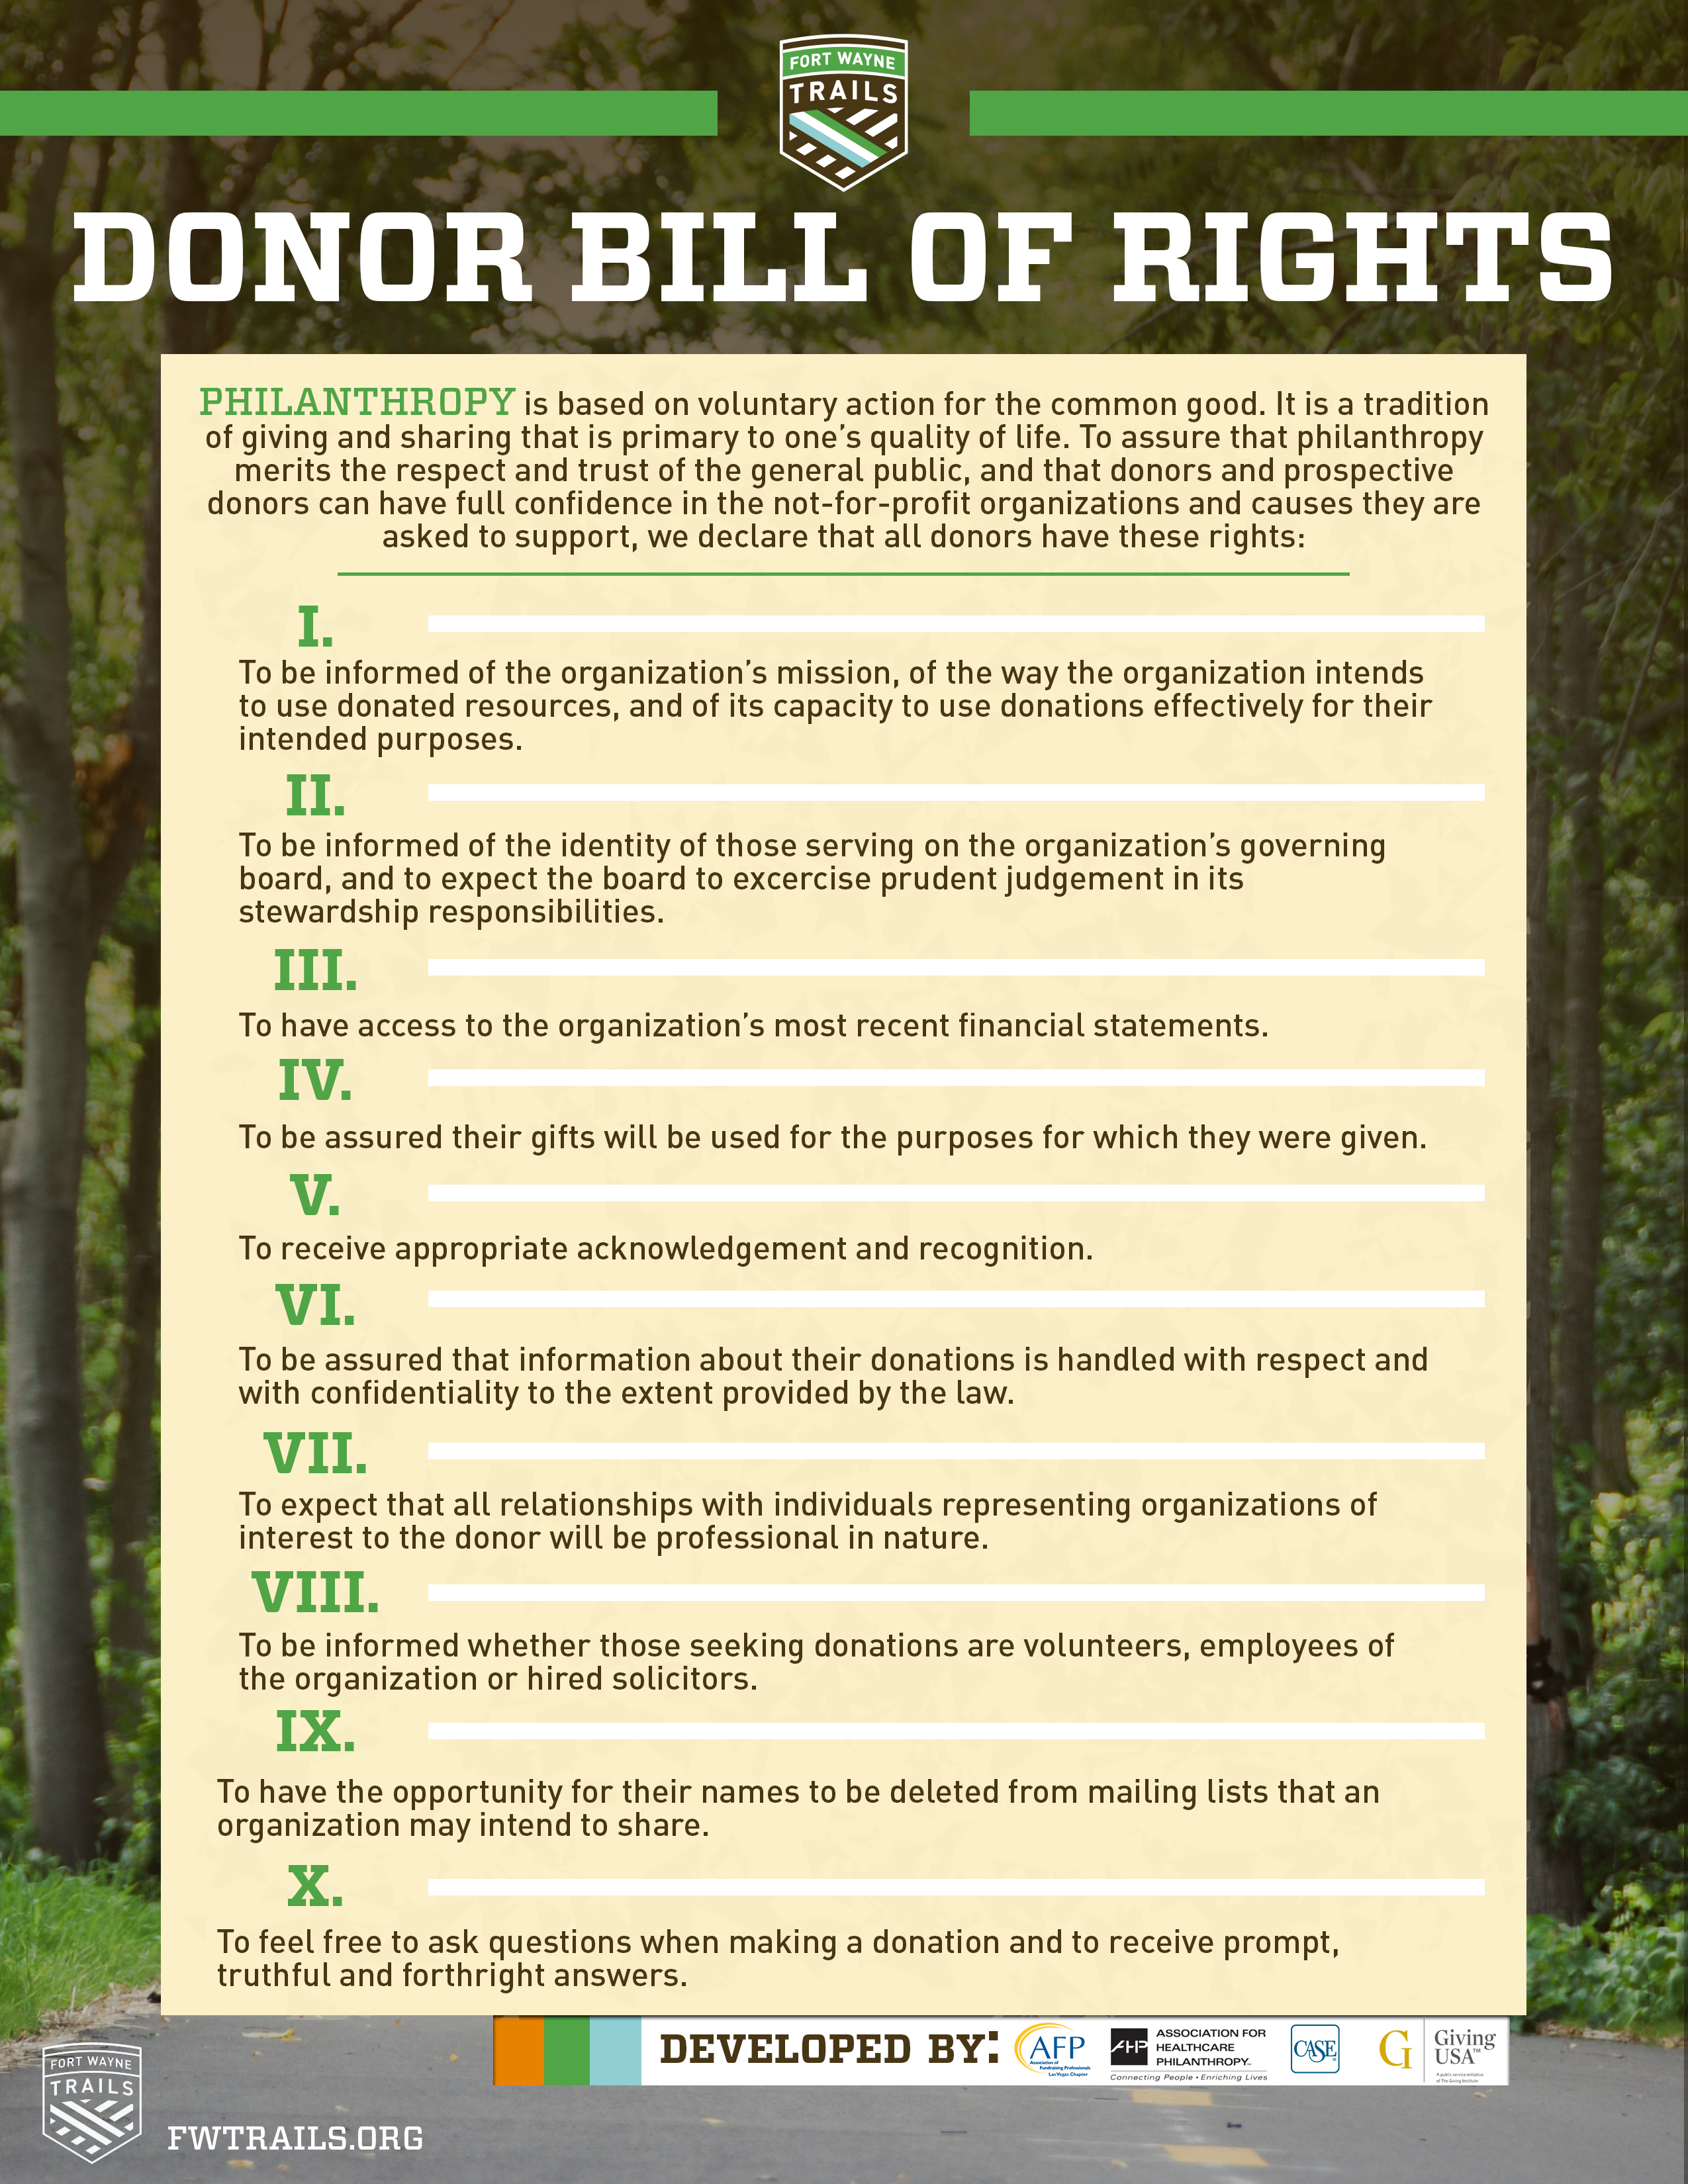 Fort Wayne Trails donor bill of rights list